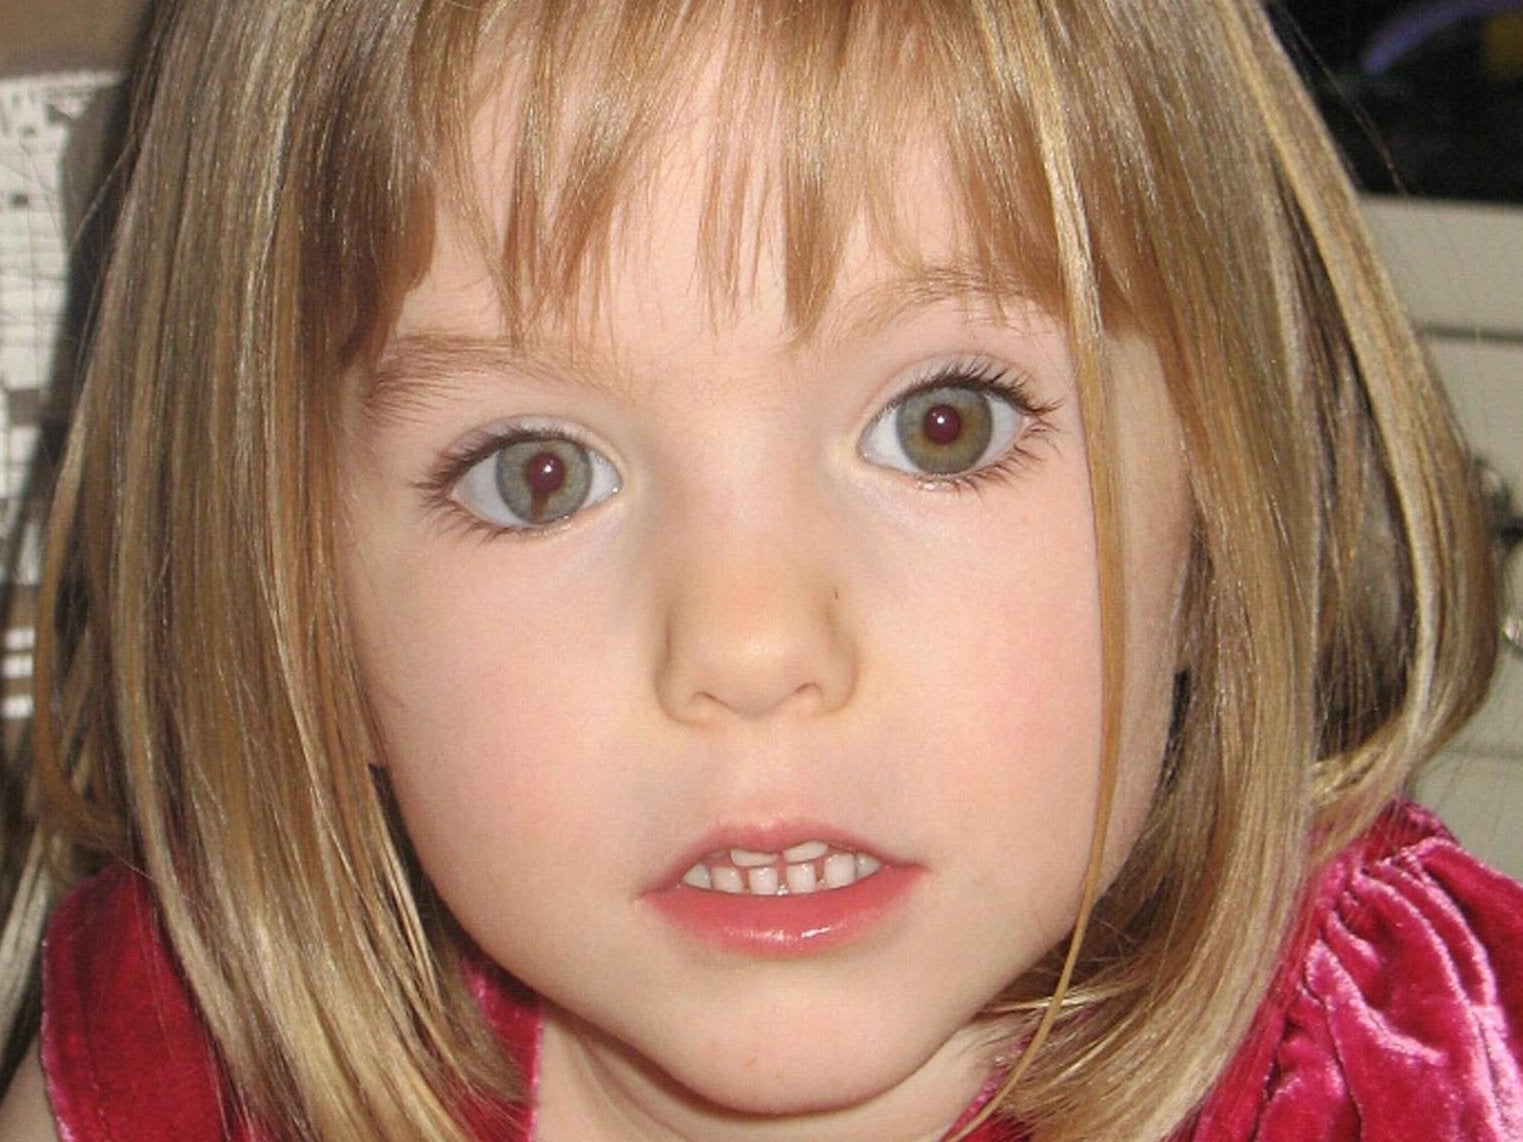 What happened to Madeleine McCann? Five possible scenarios as Netflix documentary released The Independent The Independent